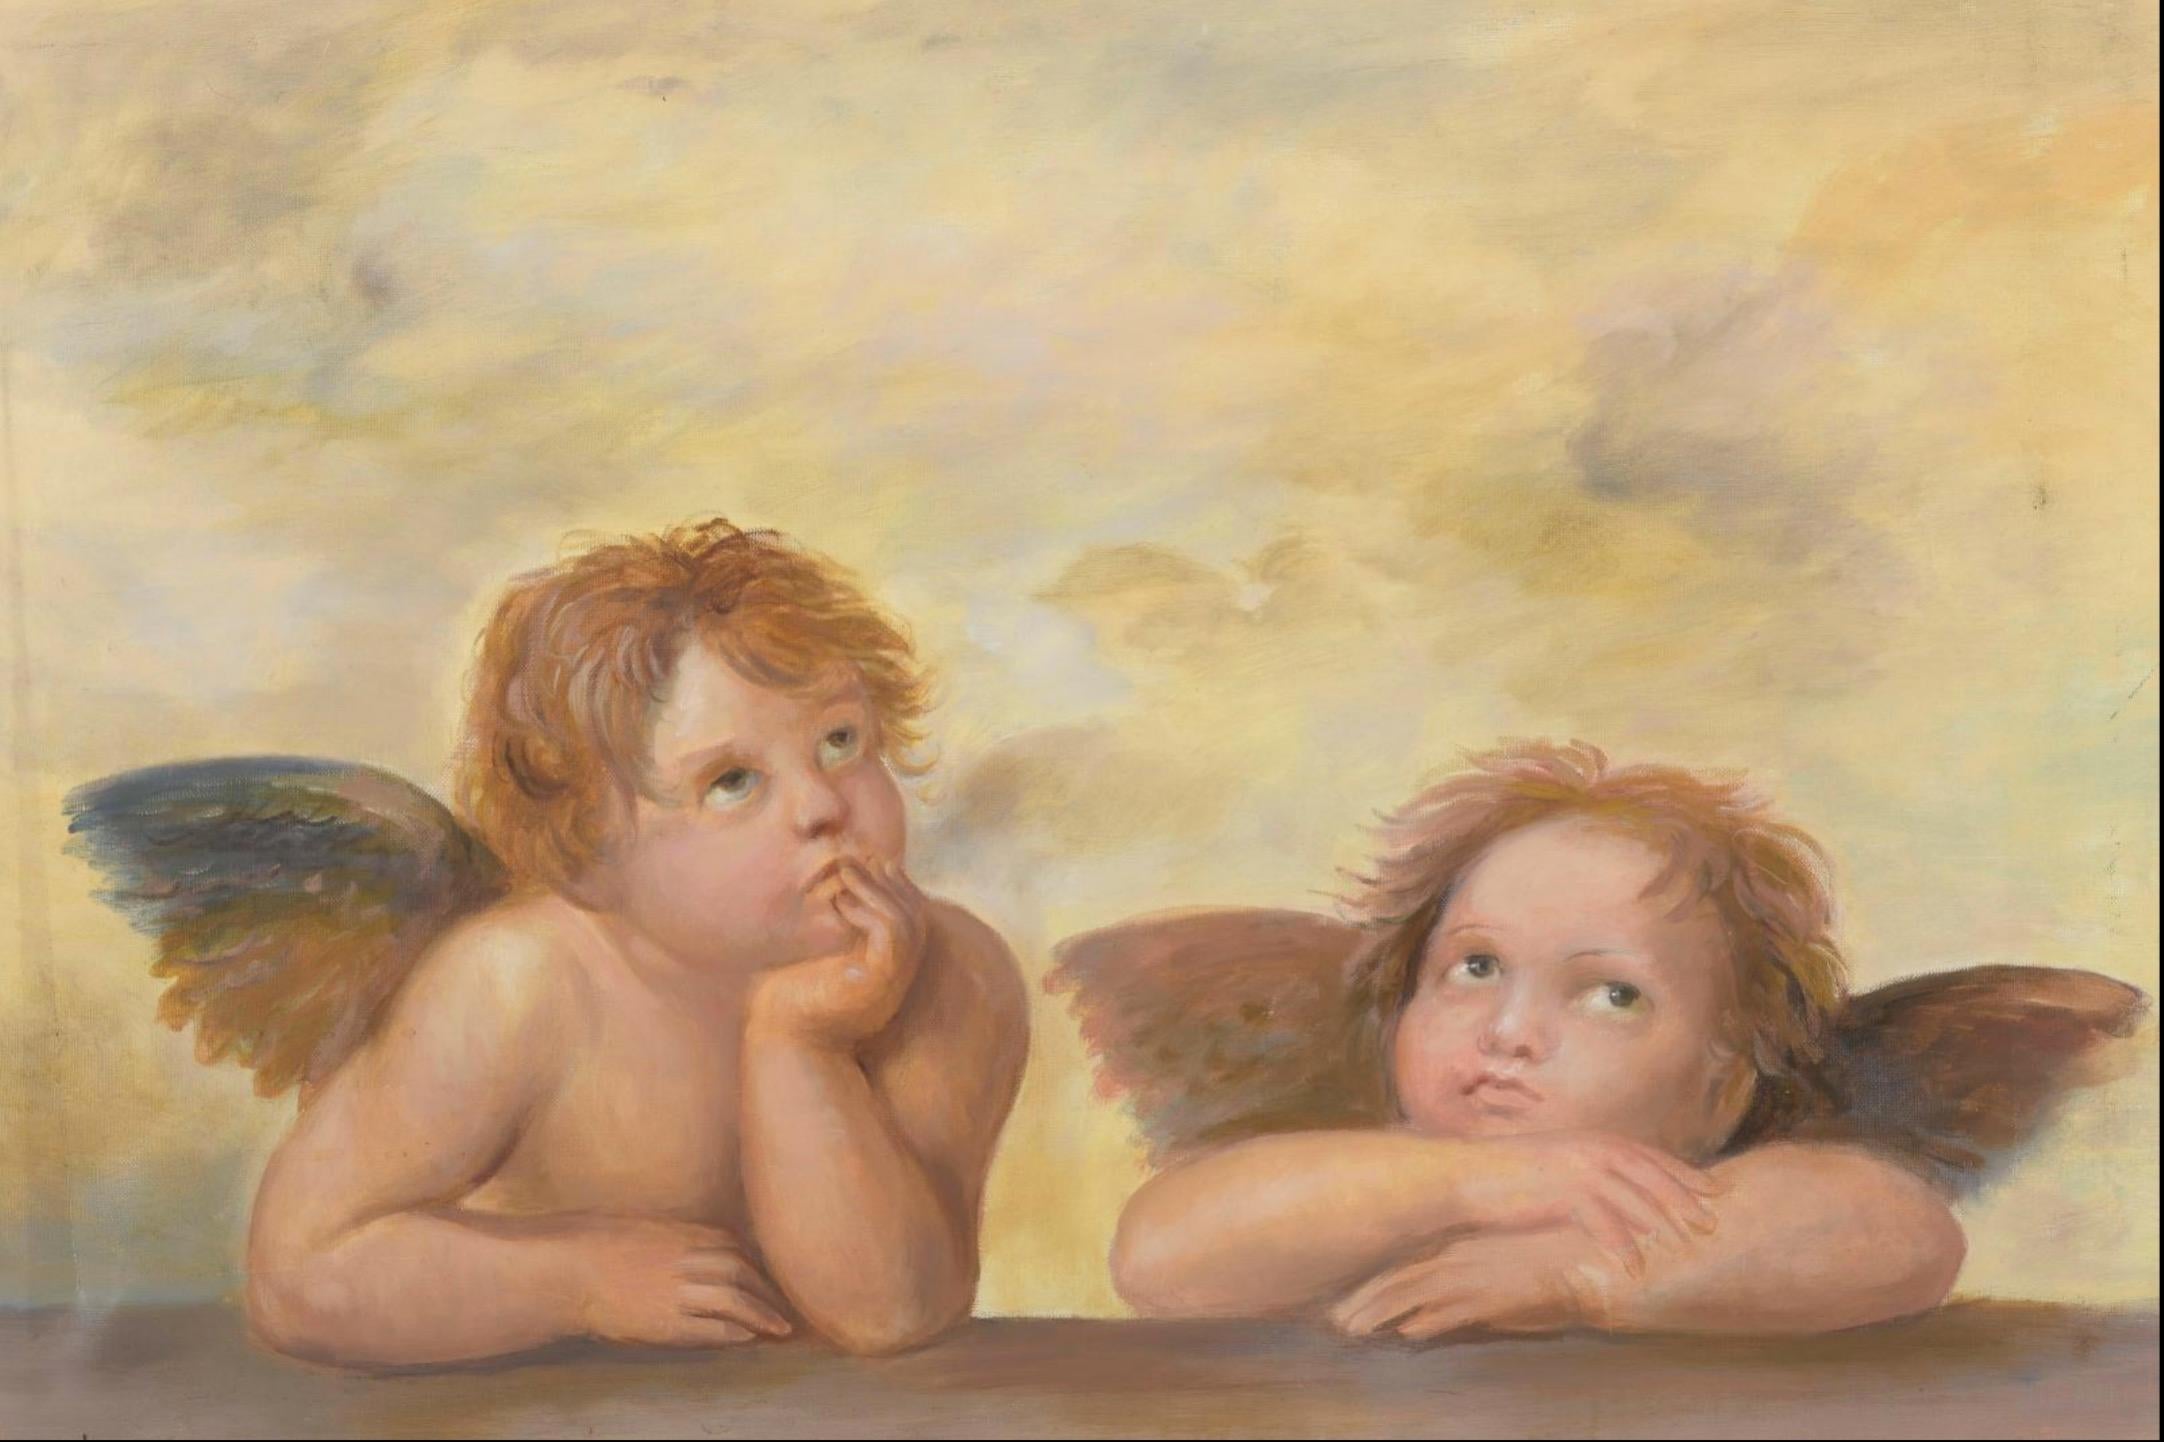 Two Angels, Large Oil Painting on Canvas by Louvre Copyist